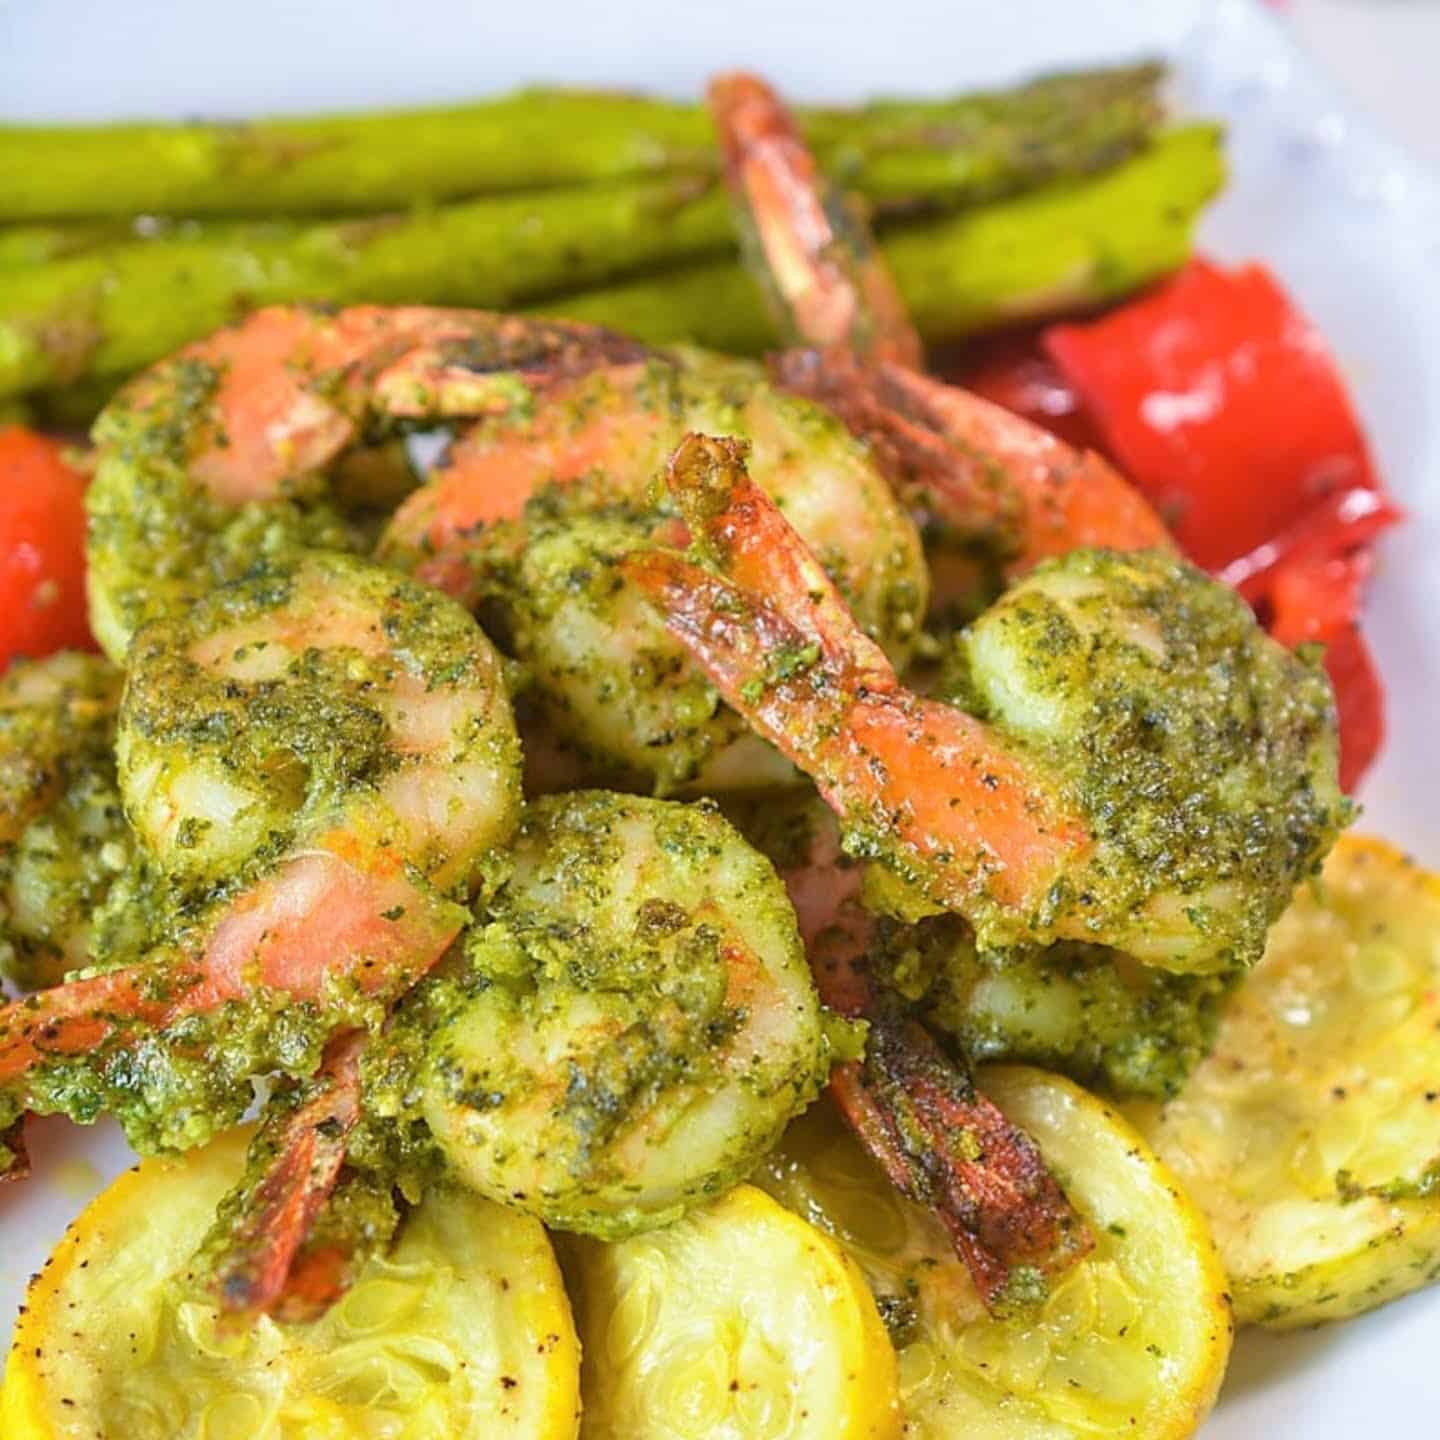 Shrimp with pesto and vegetables